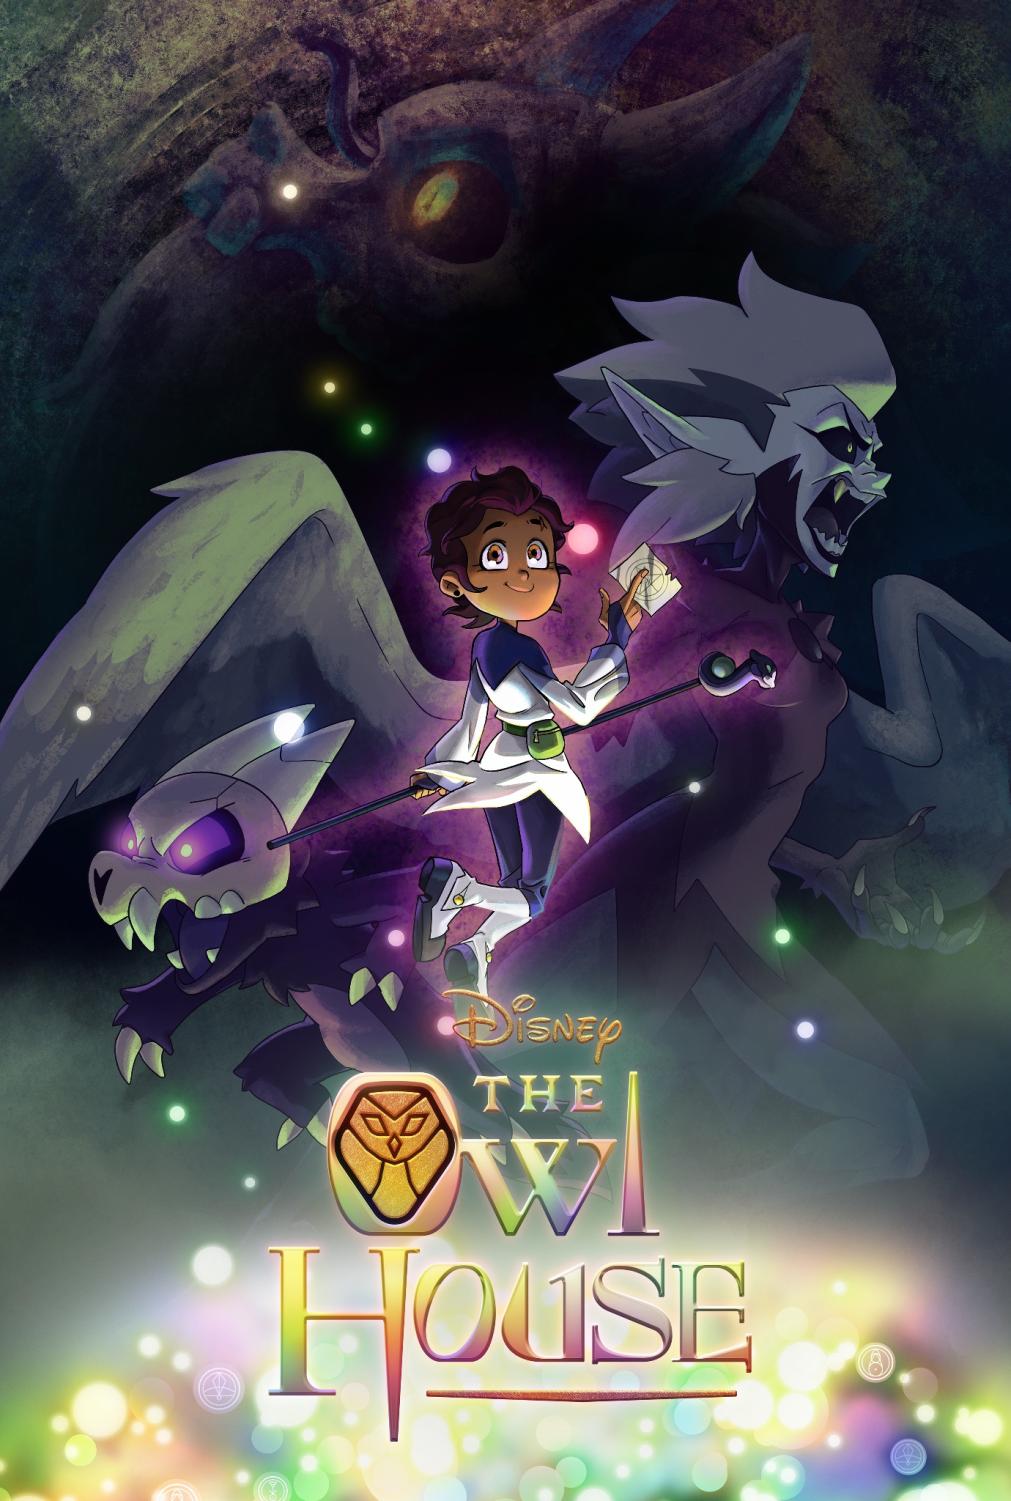 Disney Channel's The Owl House becomes first animated series to